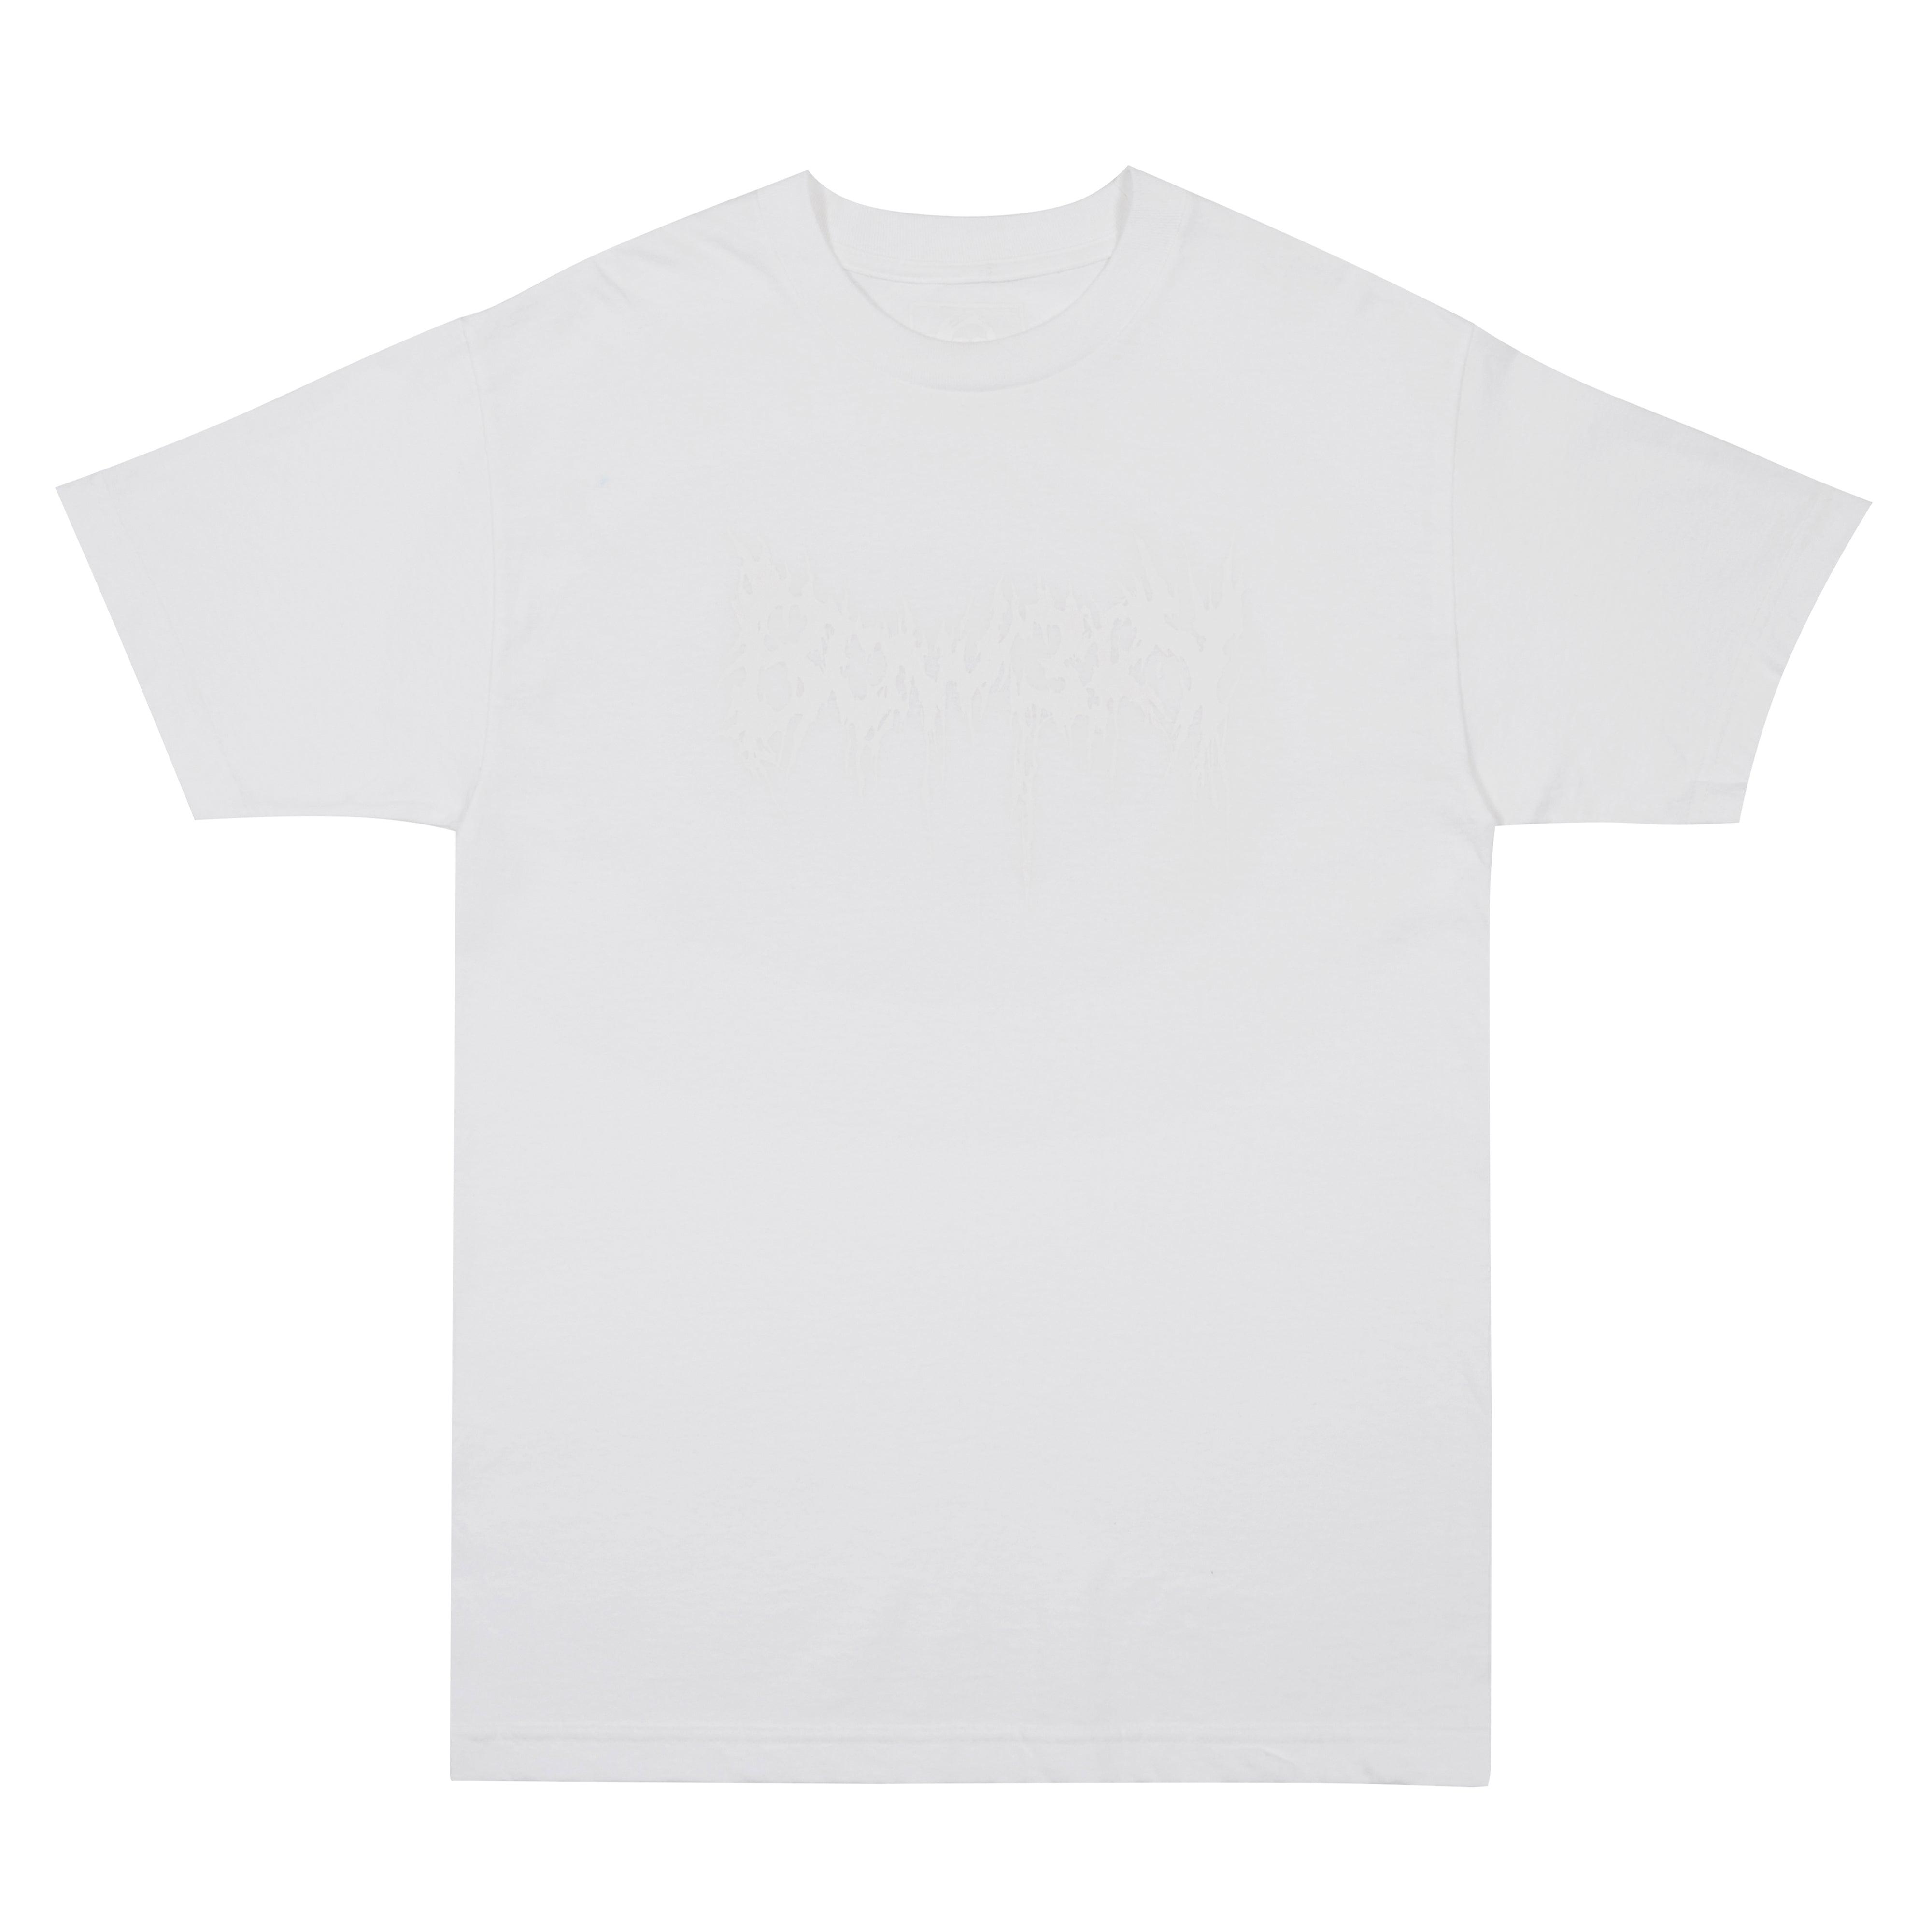 Bow3ry Grind T-Shirt (White) by BOW3RY